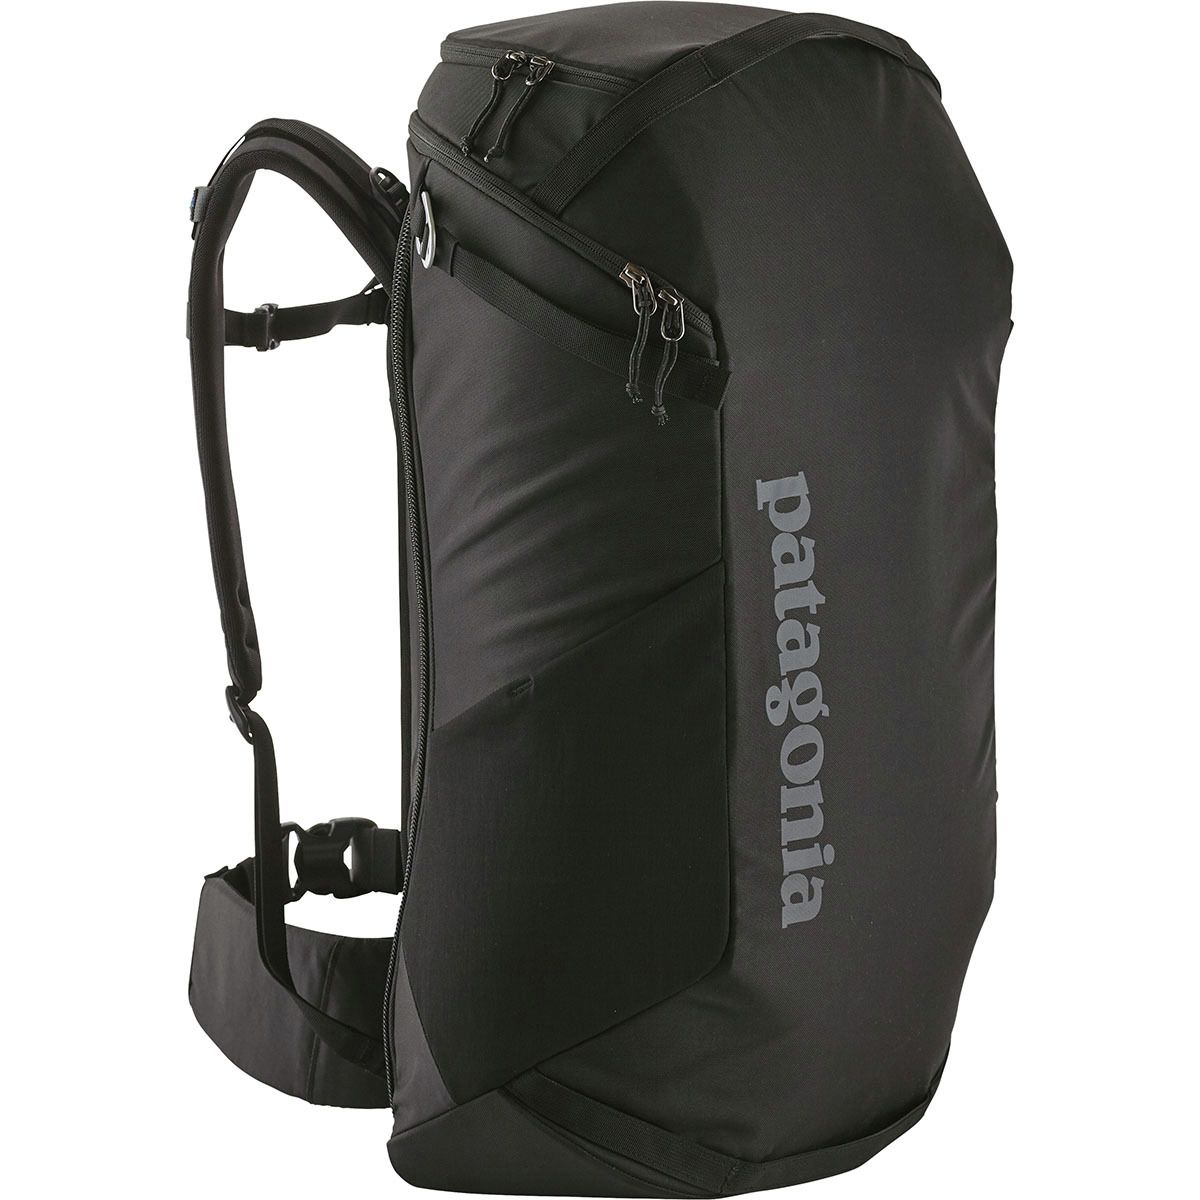 Patagonia Cragsmith 45L Backpack